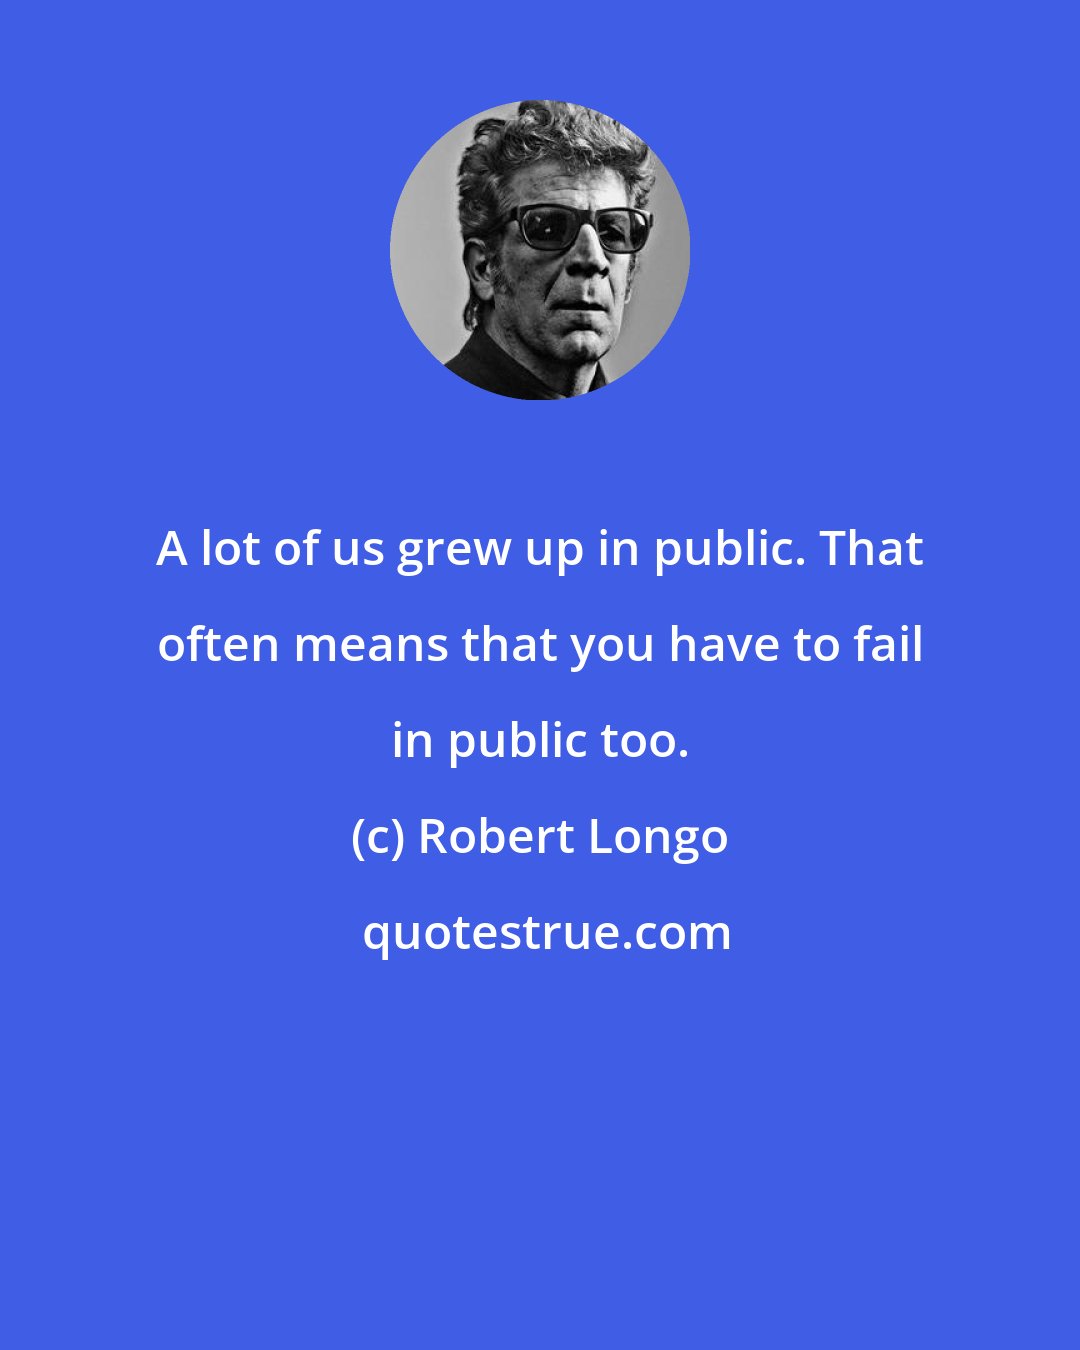 Robert Longo: A lot of us grew up in public. That often means that you have to fail in public too.